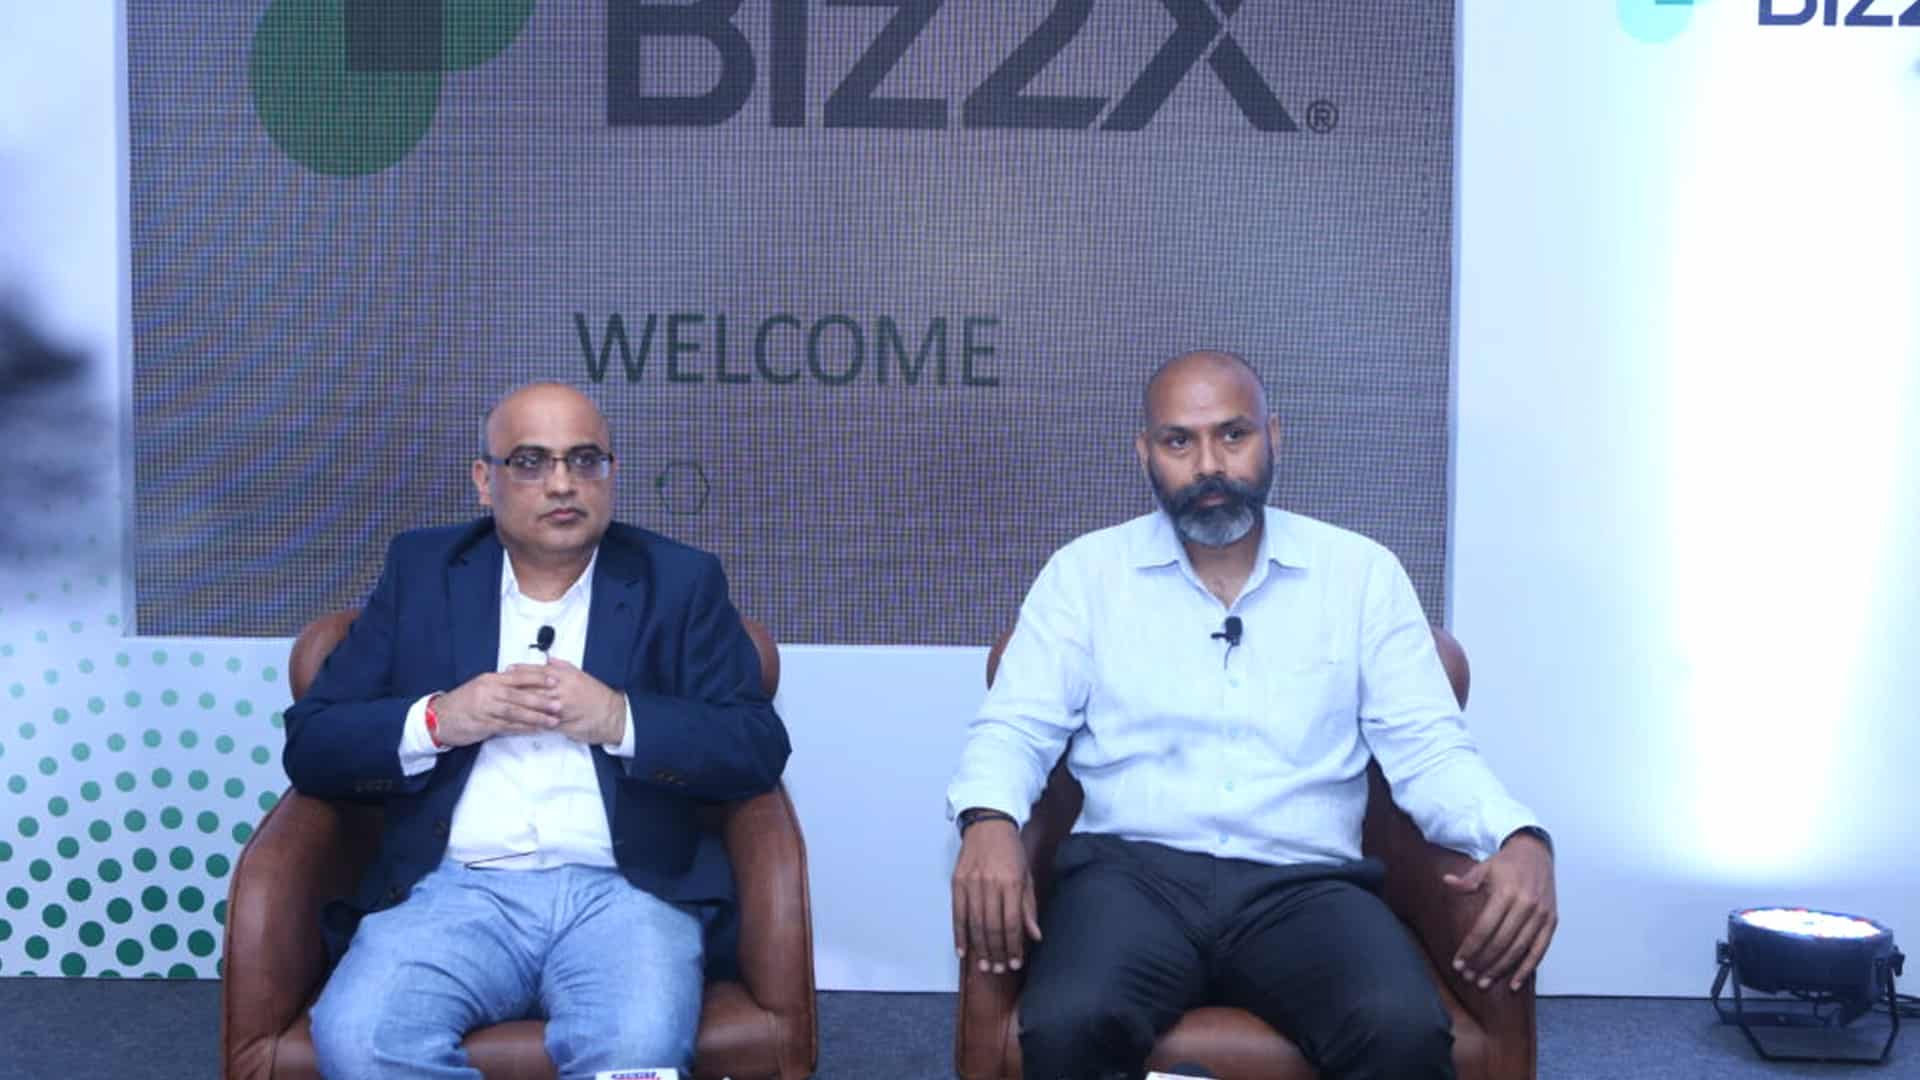 Need to create specialised SME digital bank: Co-founder of Biz2Credit